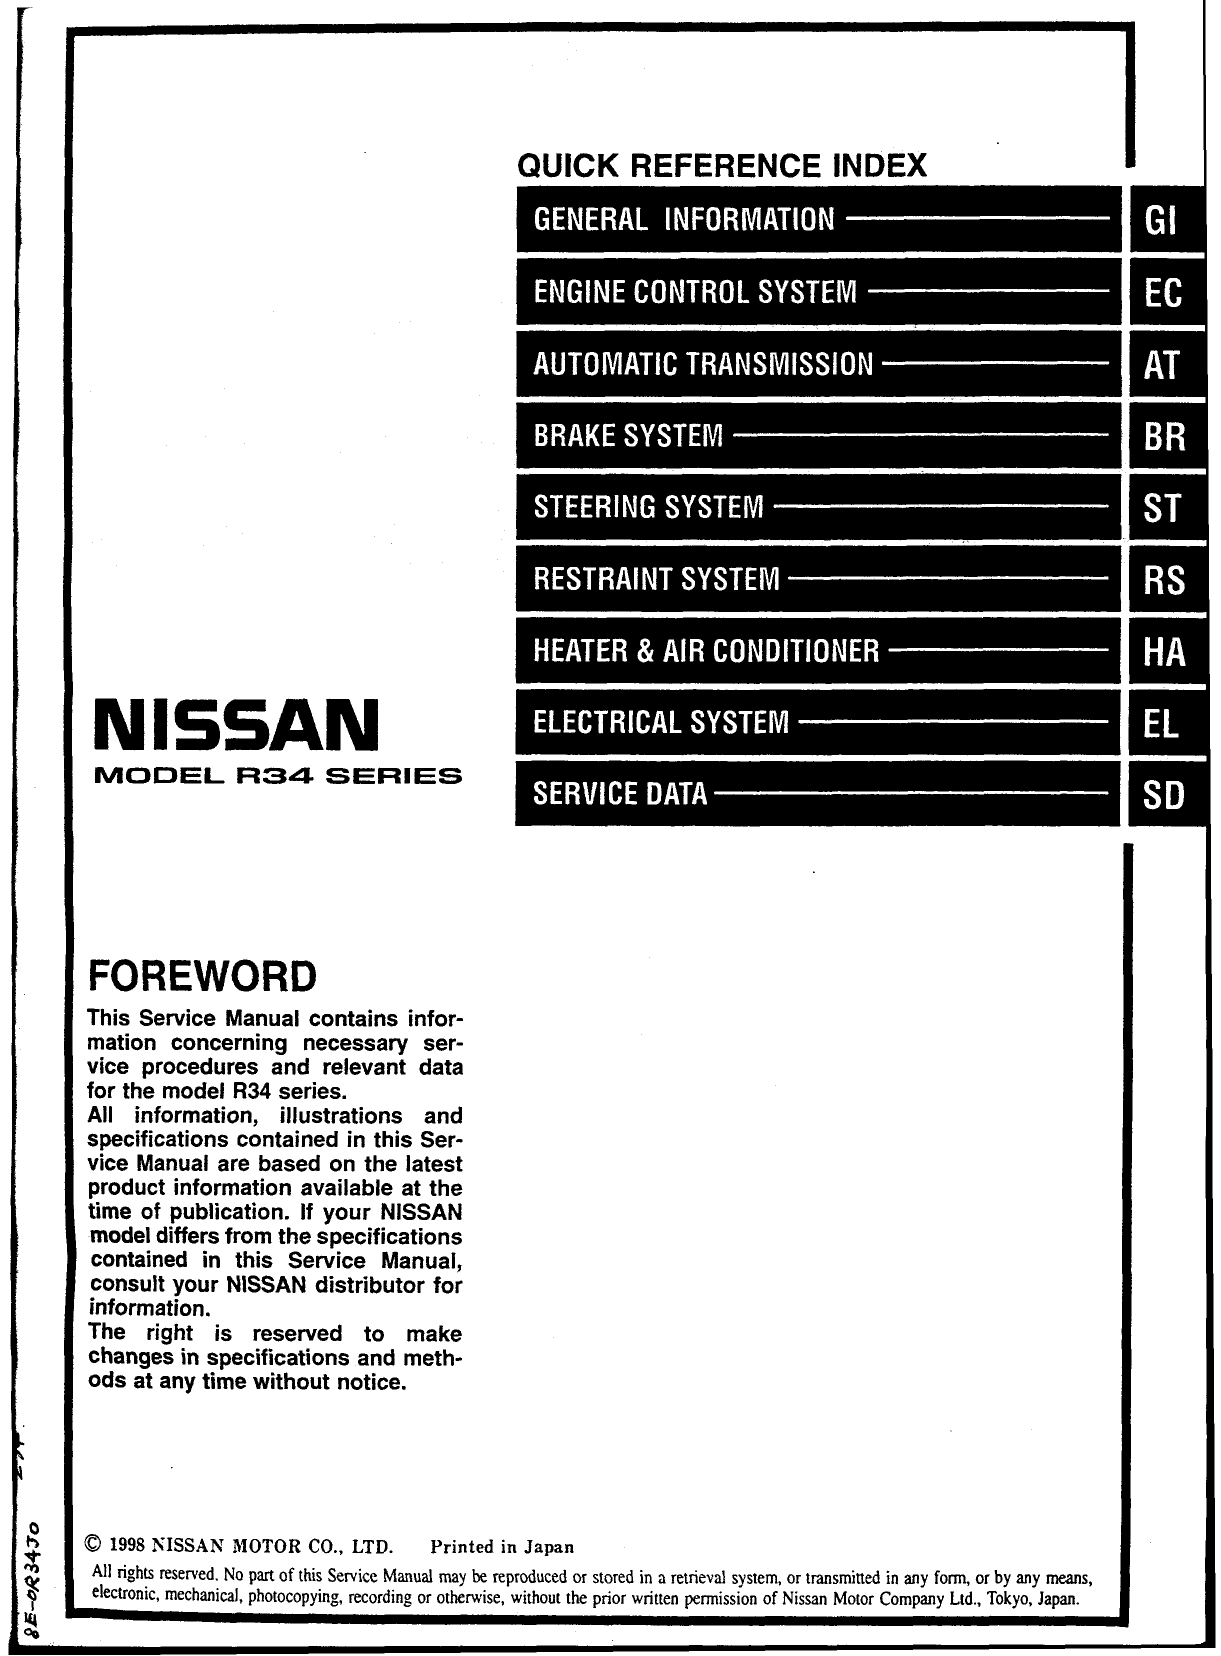 1998-2002 Nissan Skyline R34 service manual Preview image 2